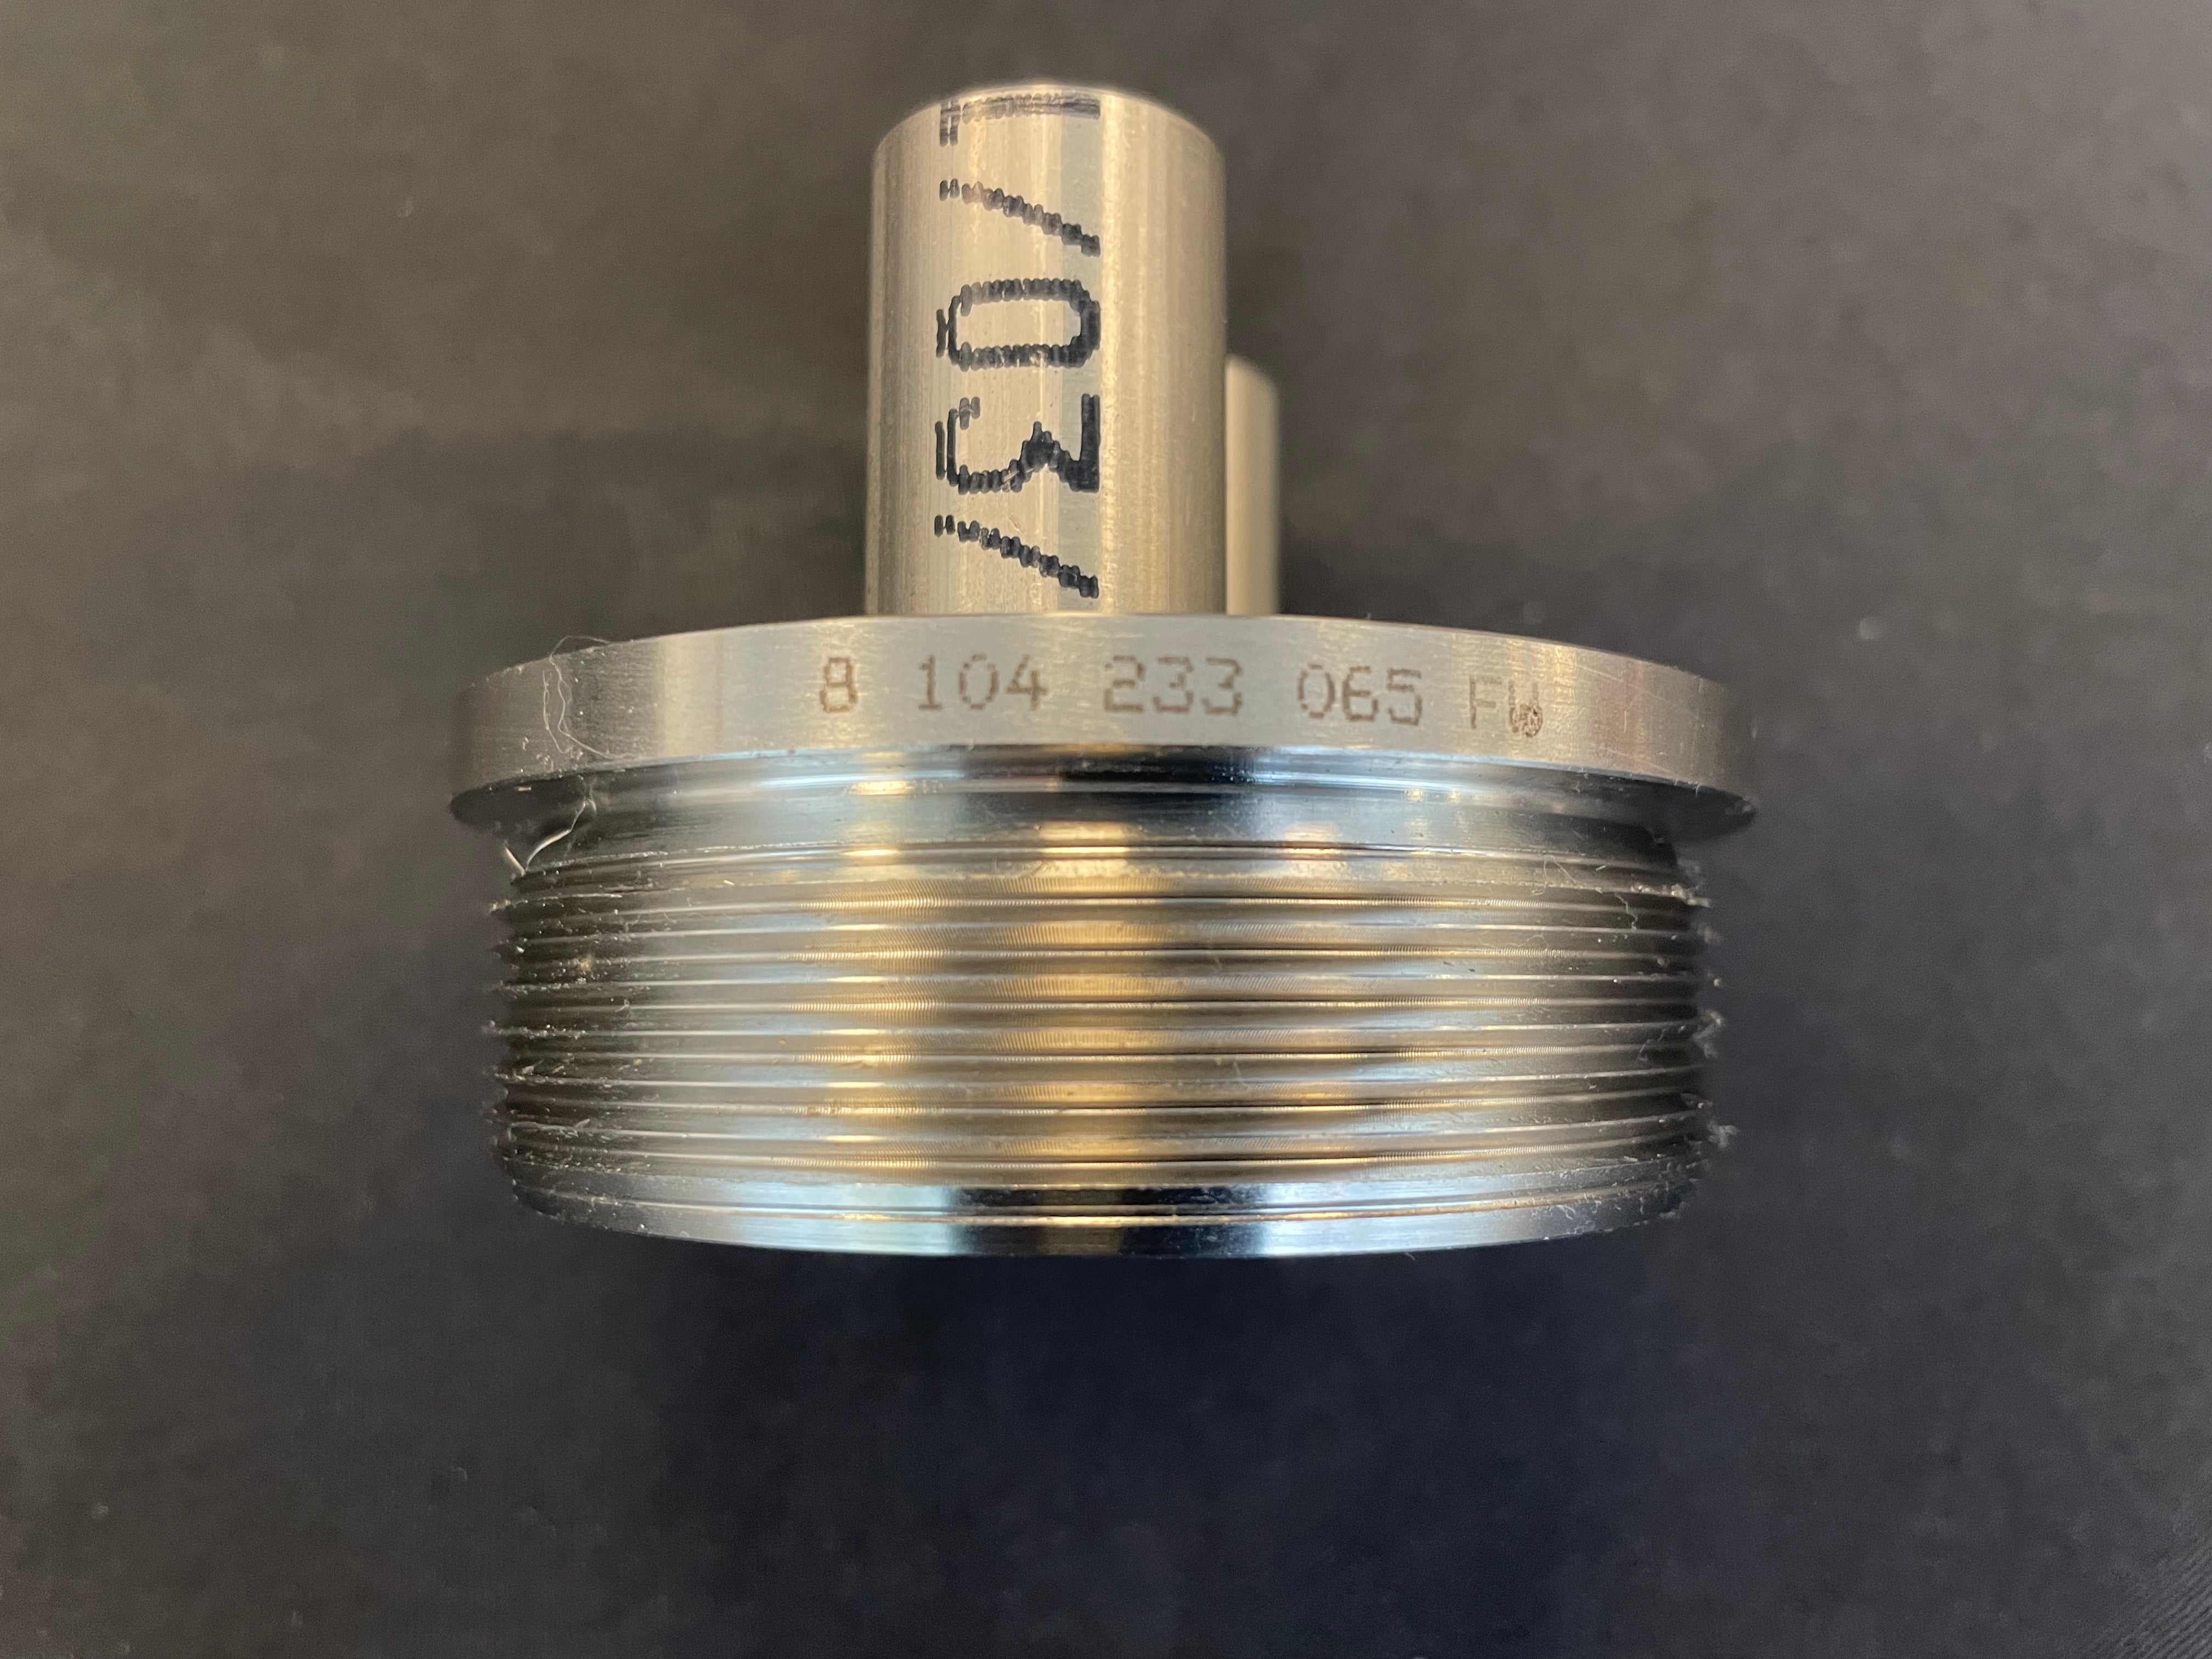 Connection for Vacuum Filter  8 104 233 065